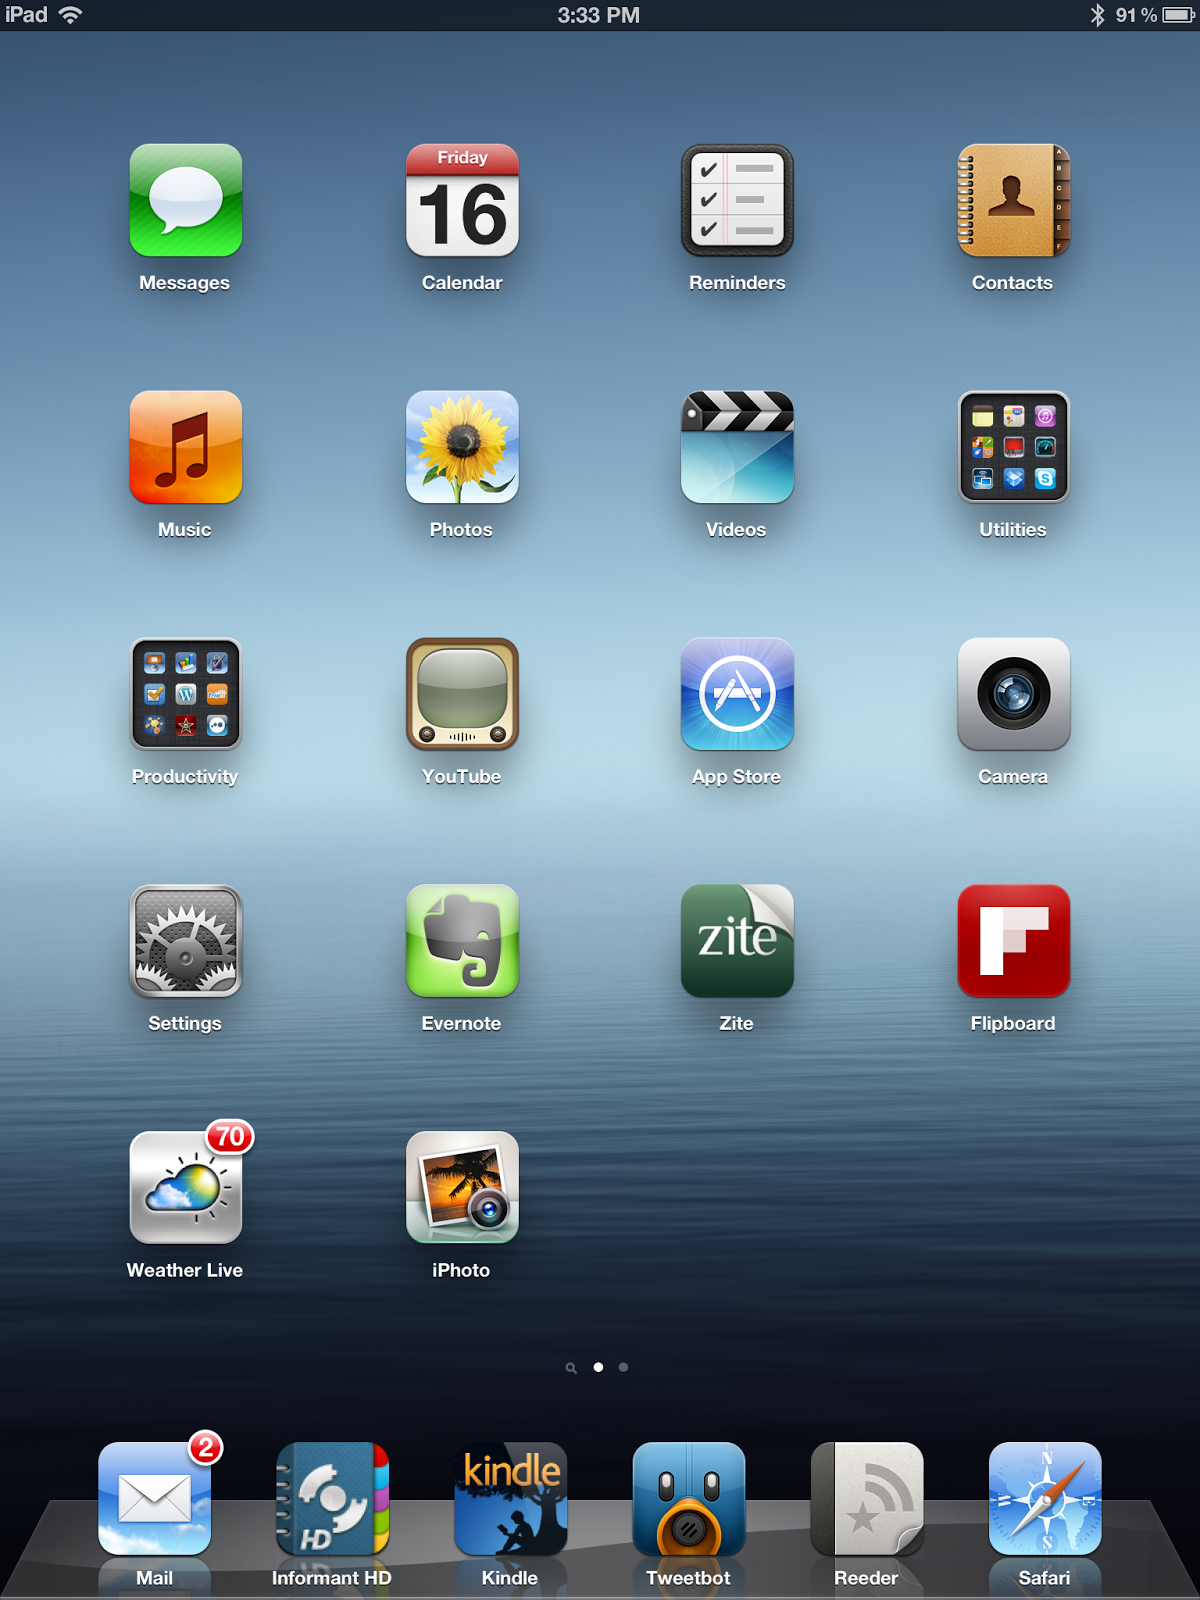 IOS 6 IPOD Touch 3